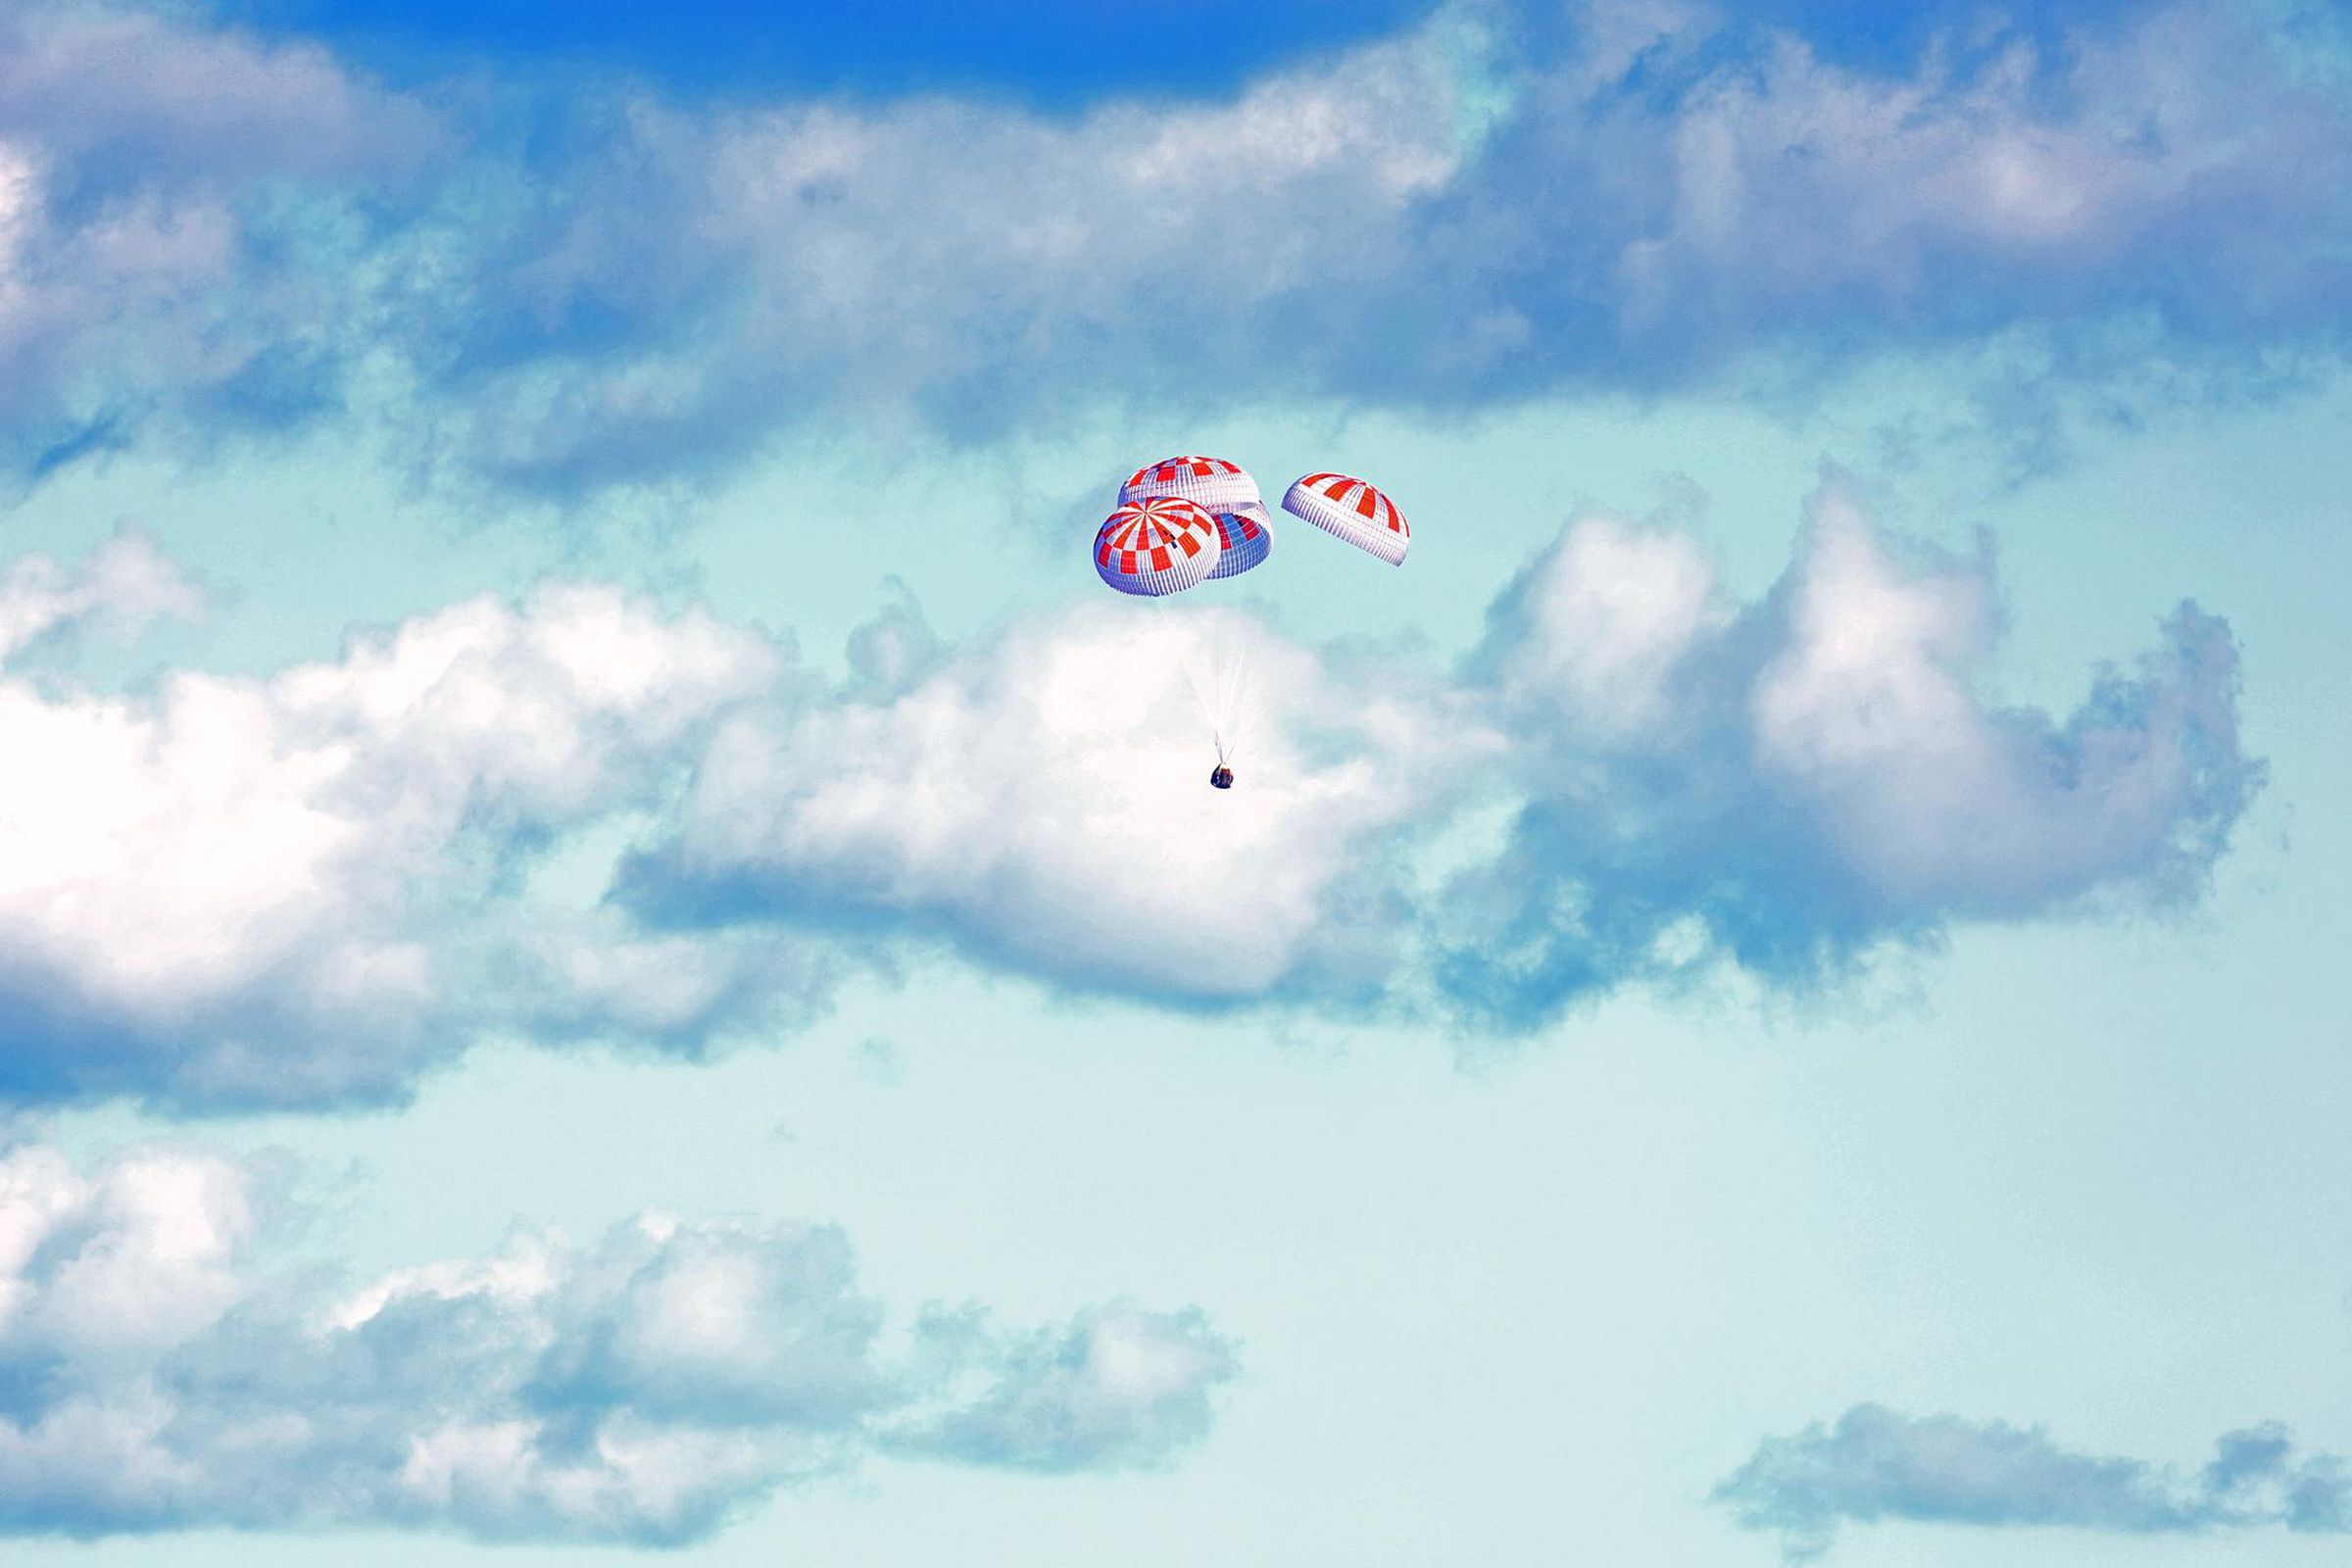 SpaceX’s Crew Dragon, with its parachutes deployed, as it splashed down on its first uncrewed flight test.